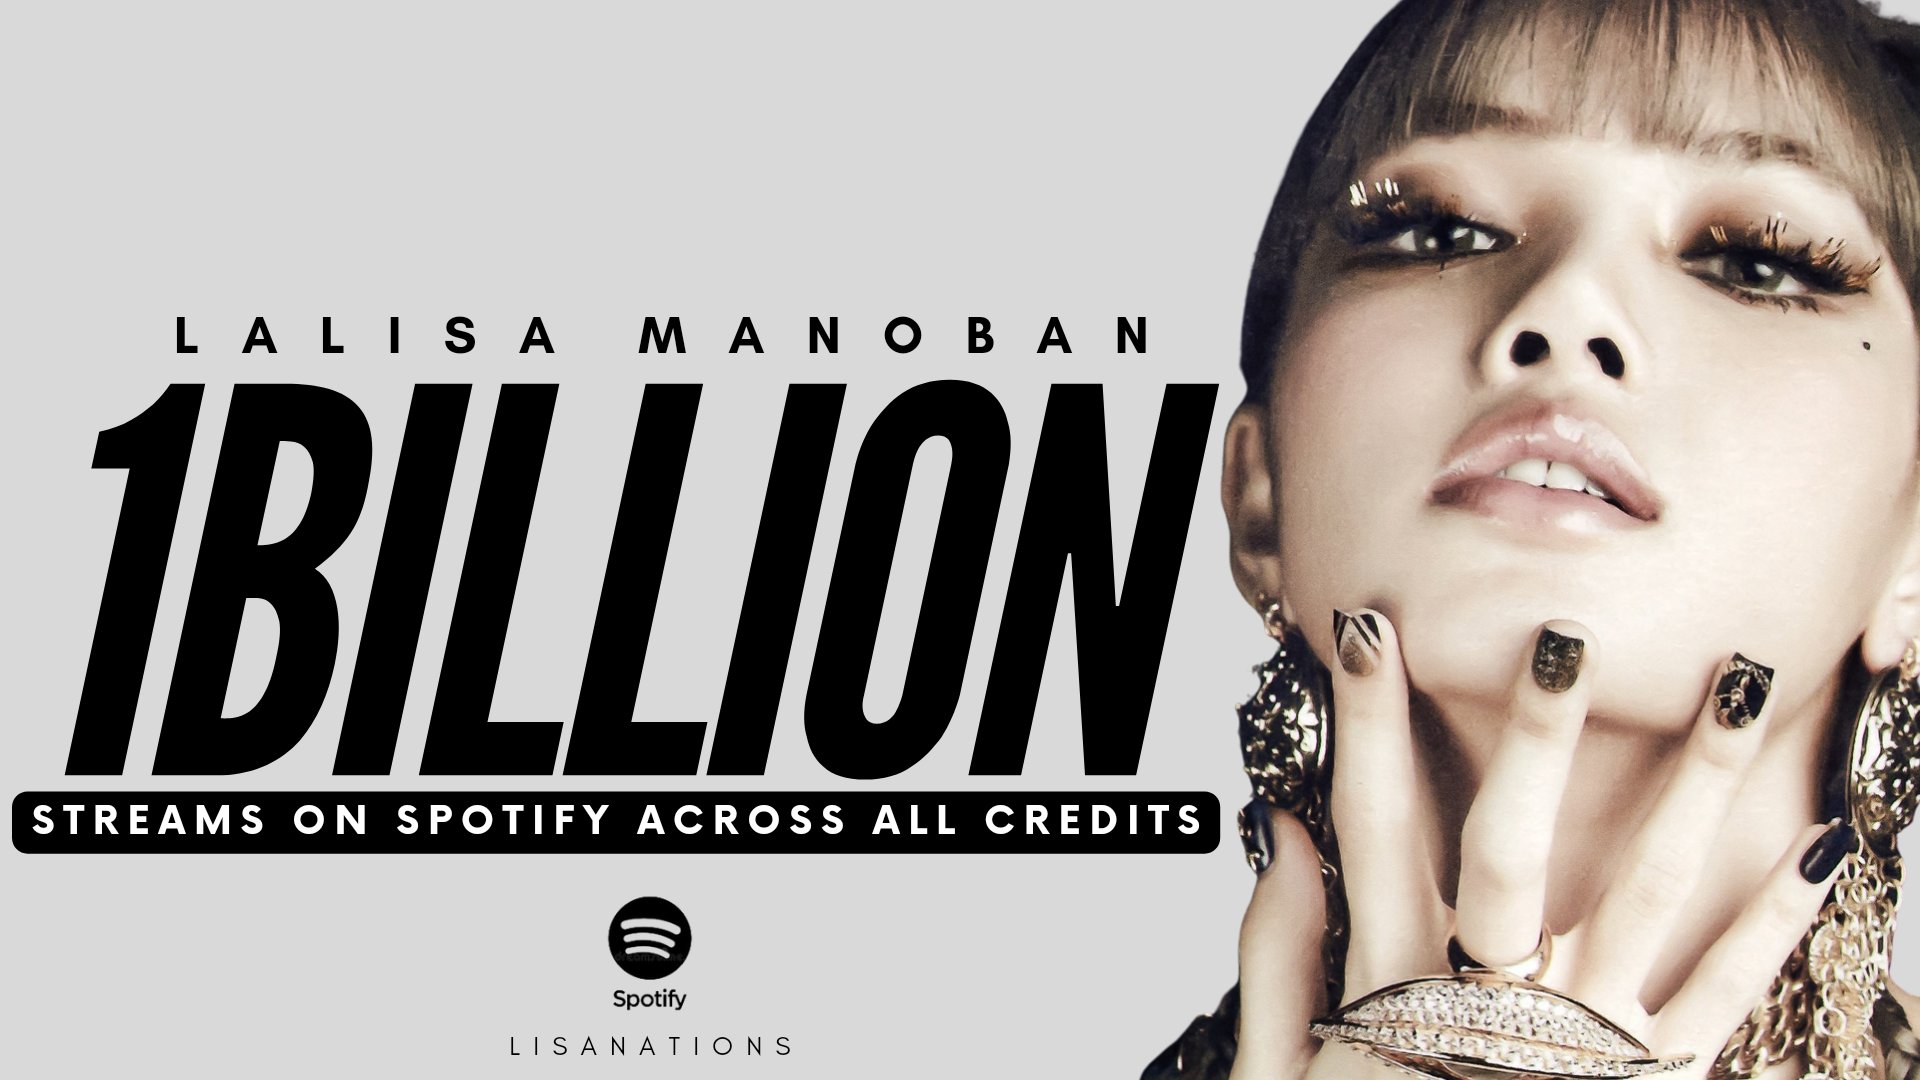 BLACKPINK's Lisa makes history as 1st K-pop solo artist with 1.5 billion  streams across all songs on Spotify